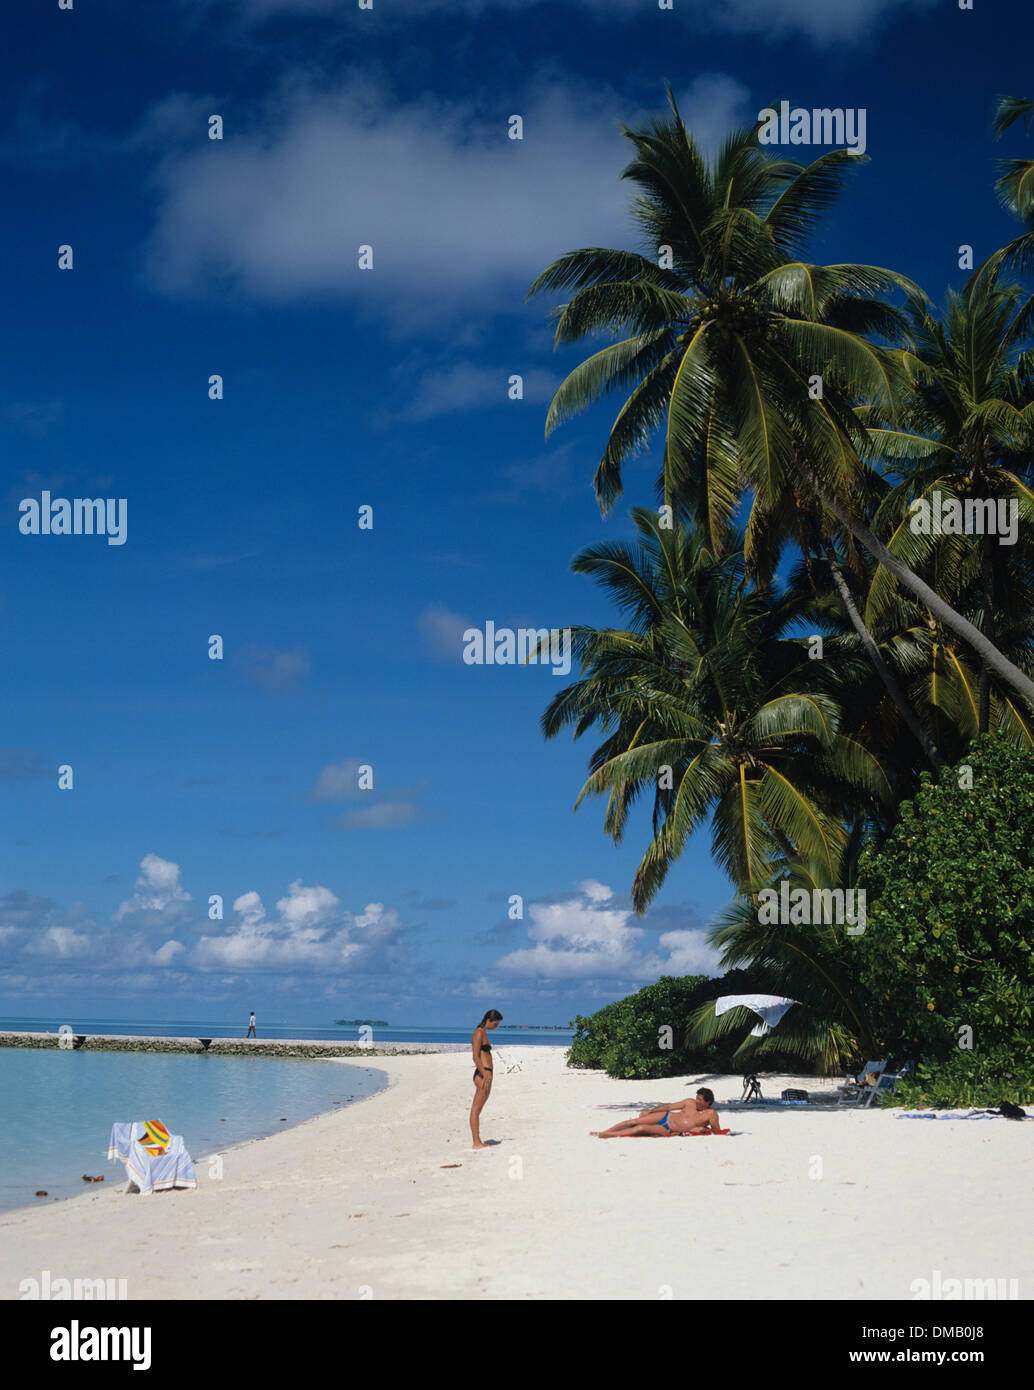 Holiday resort showing beach and palm trees, Maldives Stock Photo